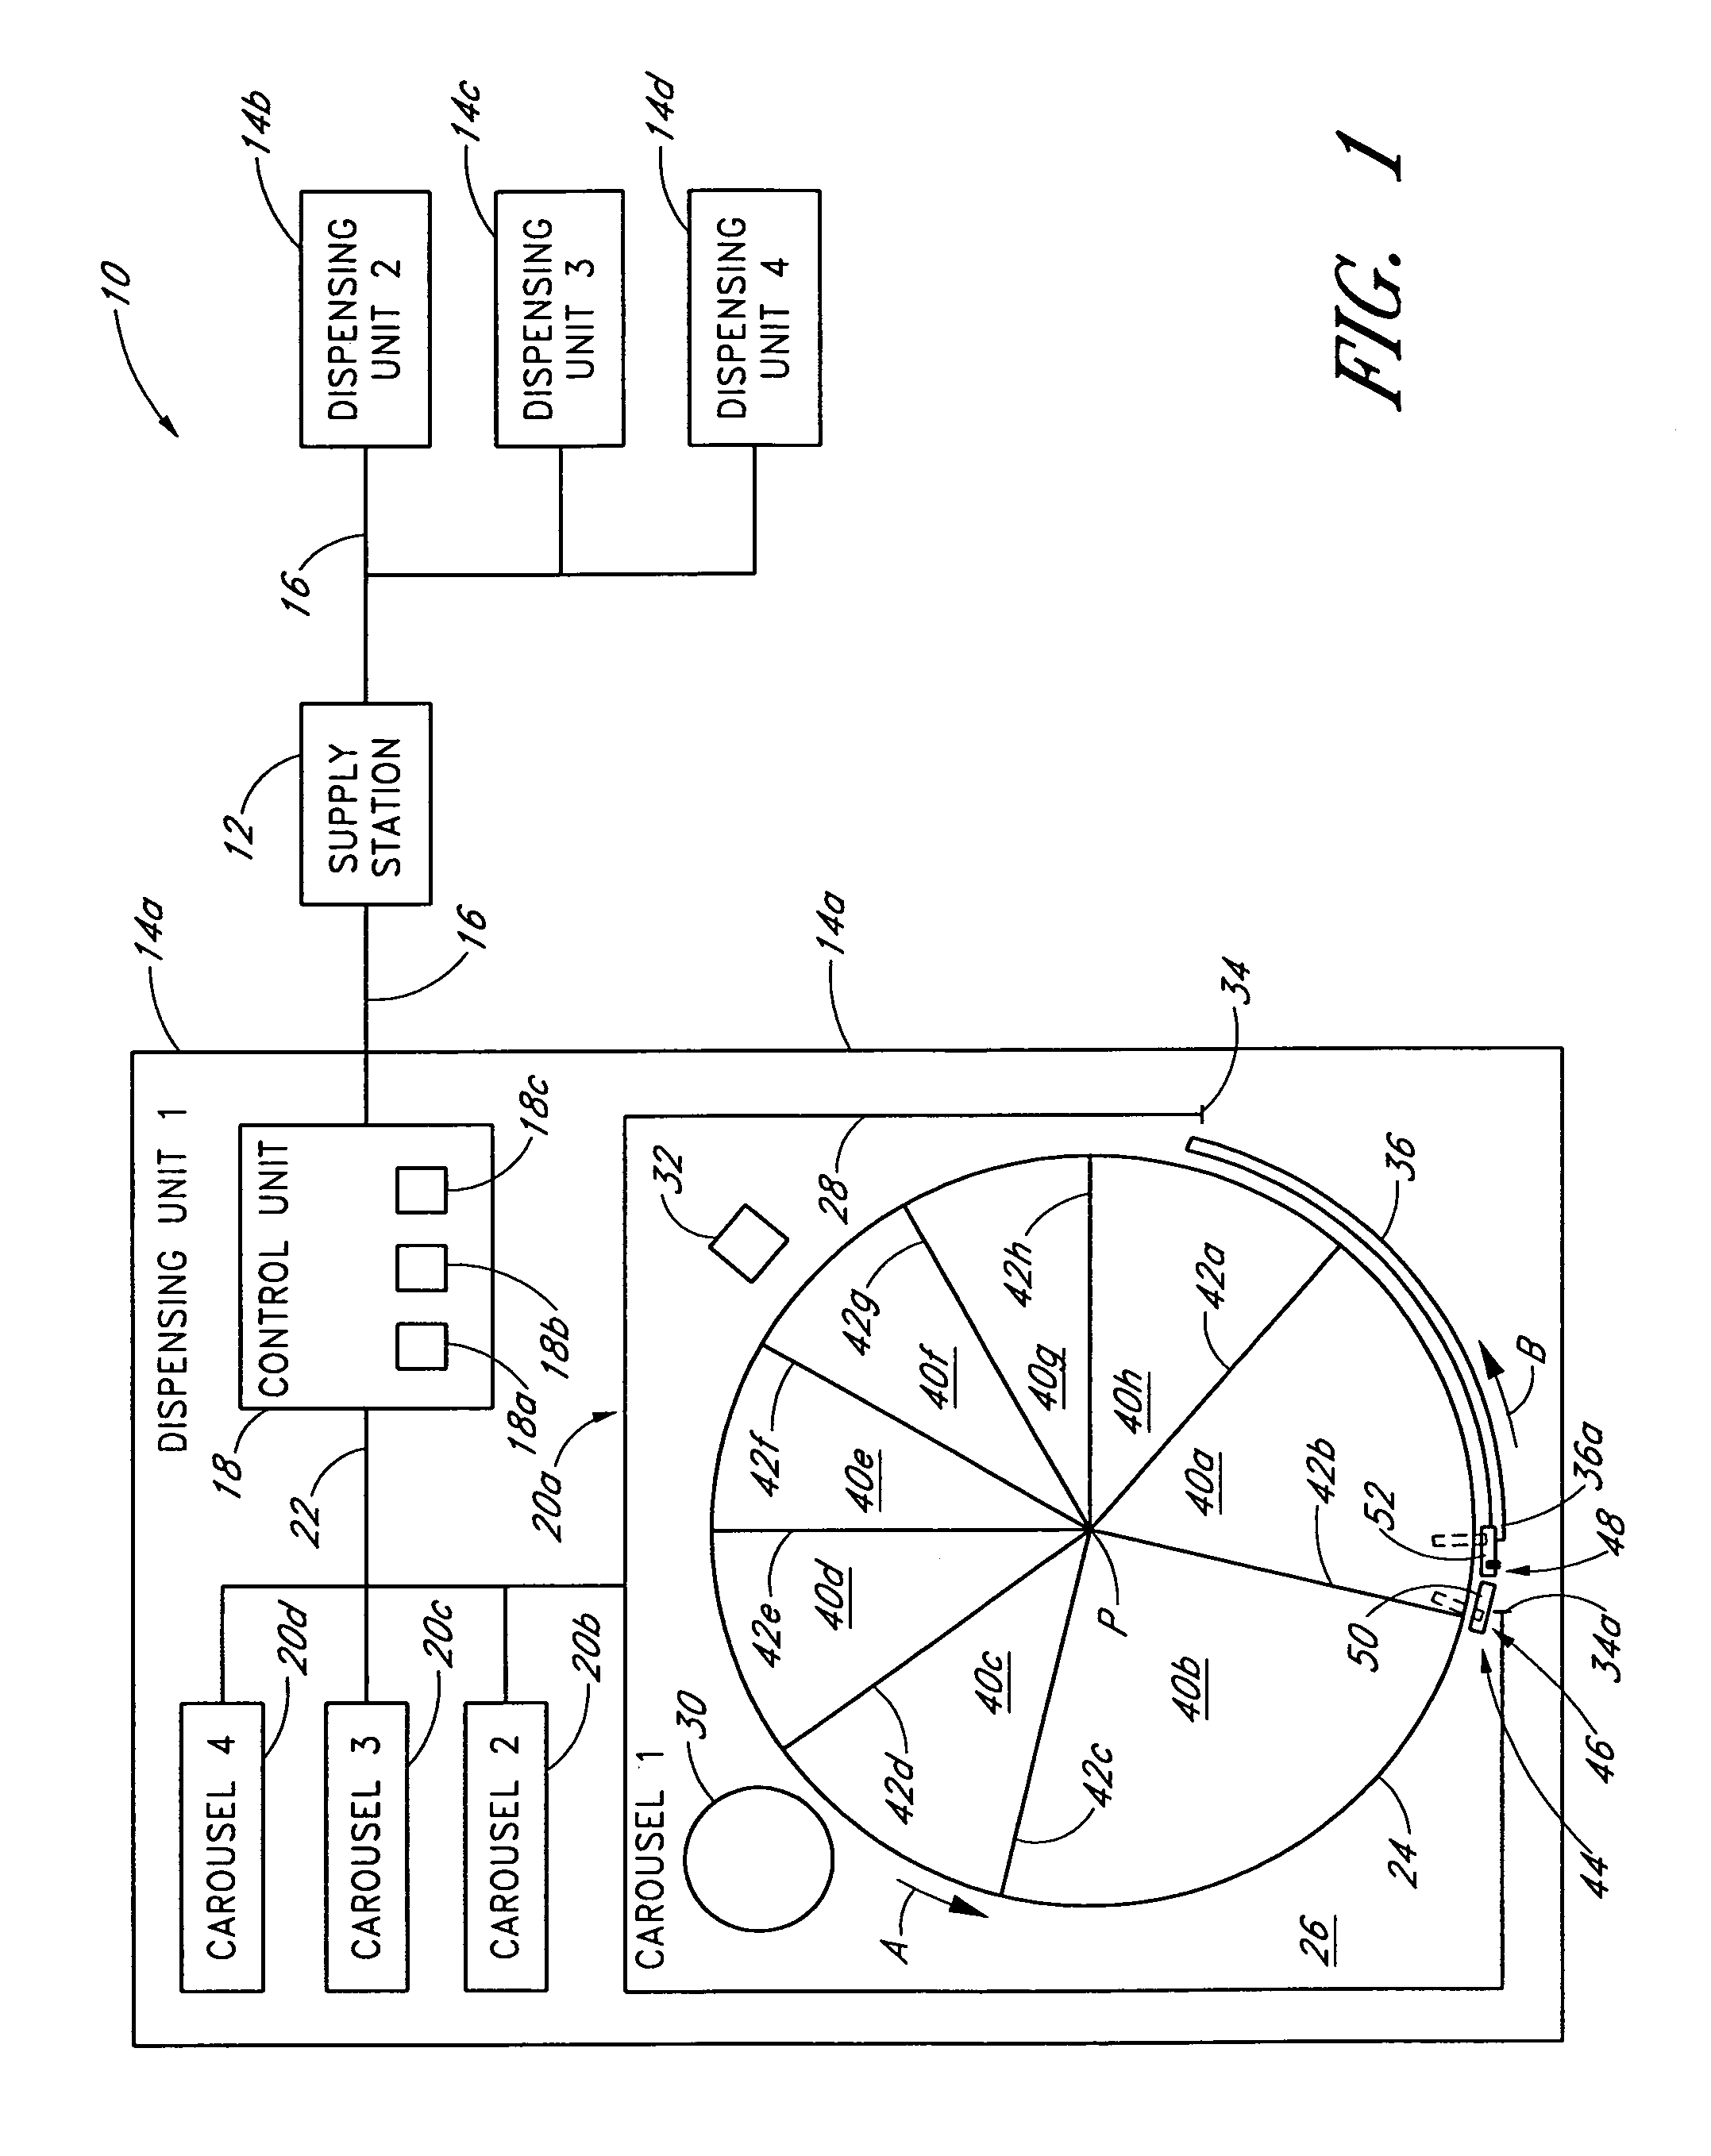 Controlled dispensing system with modular carousel